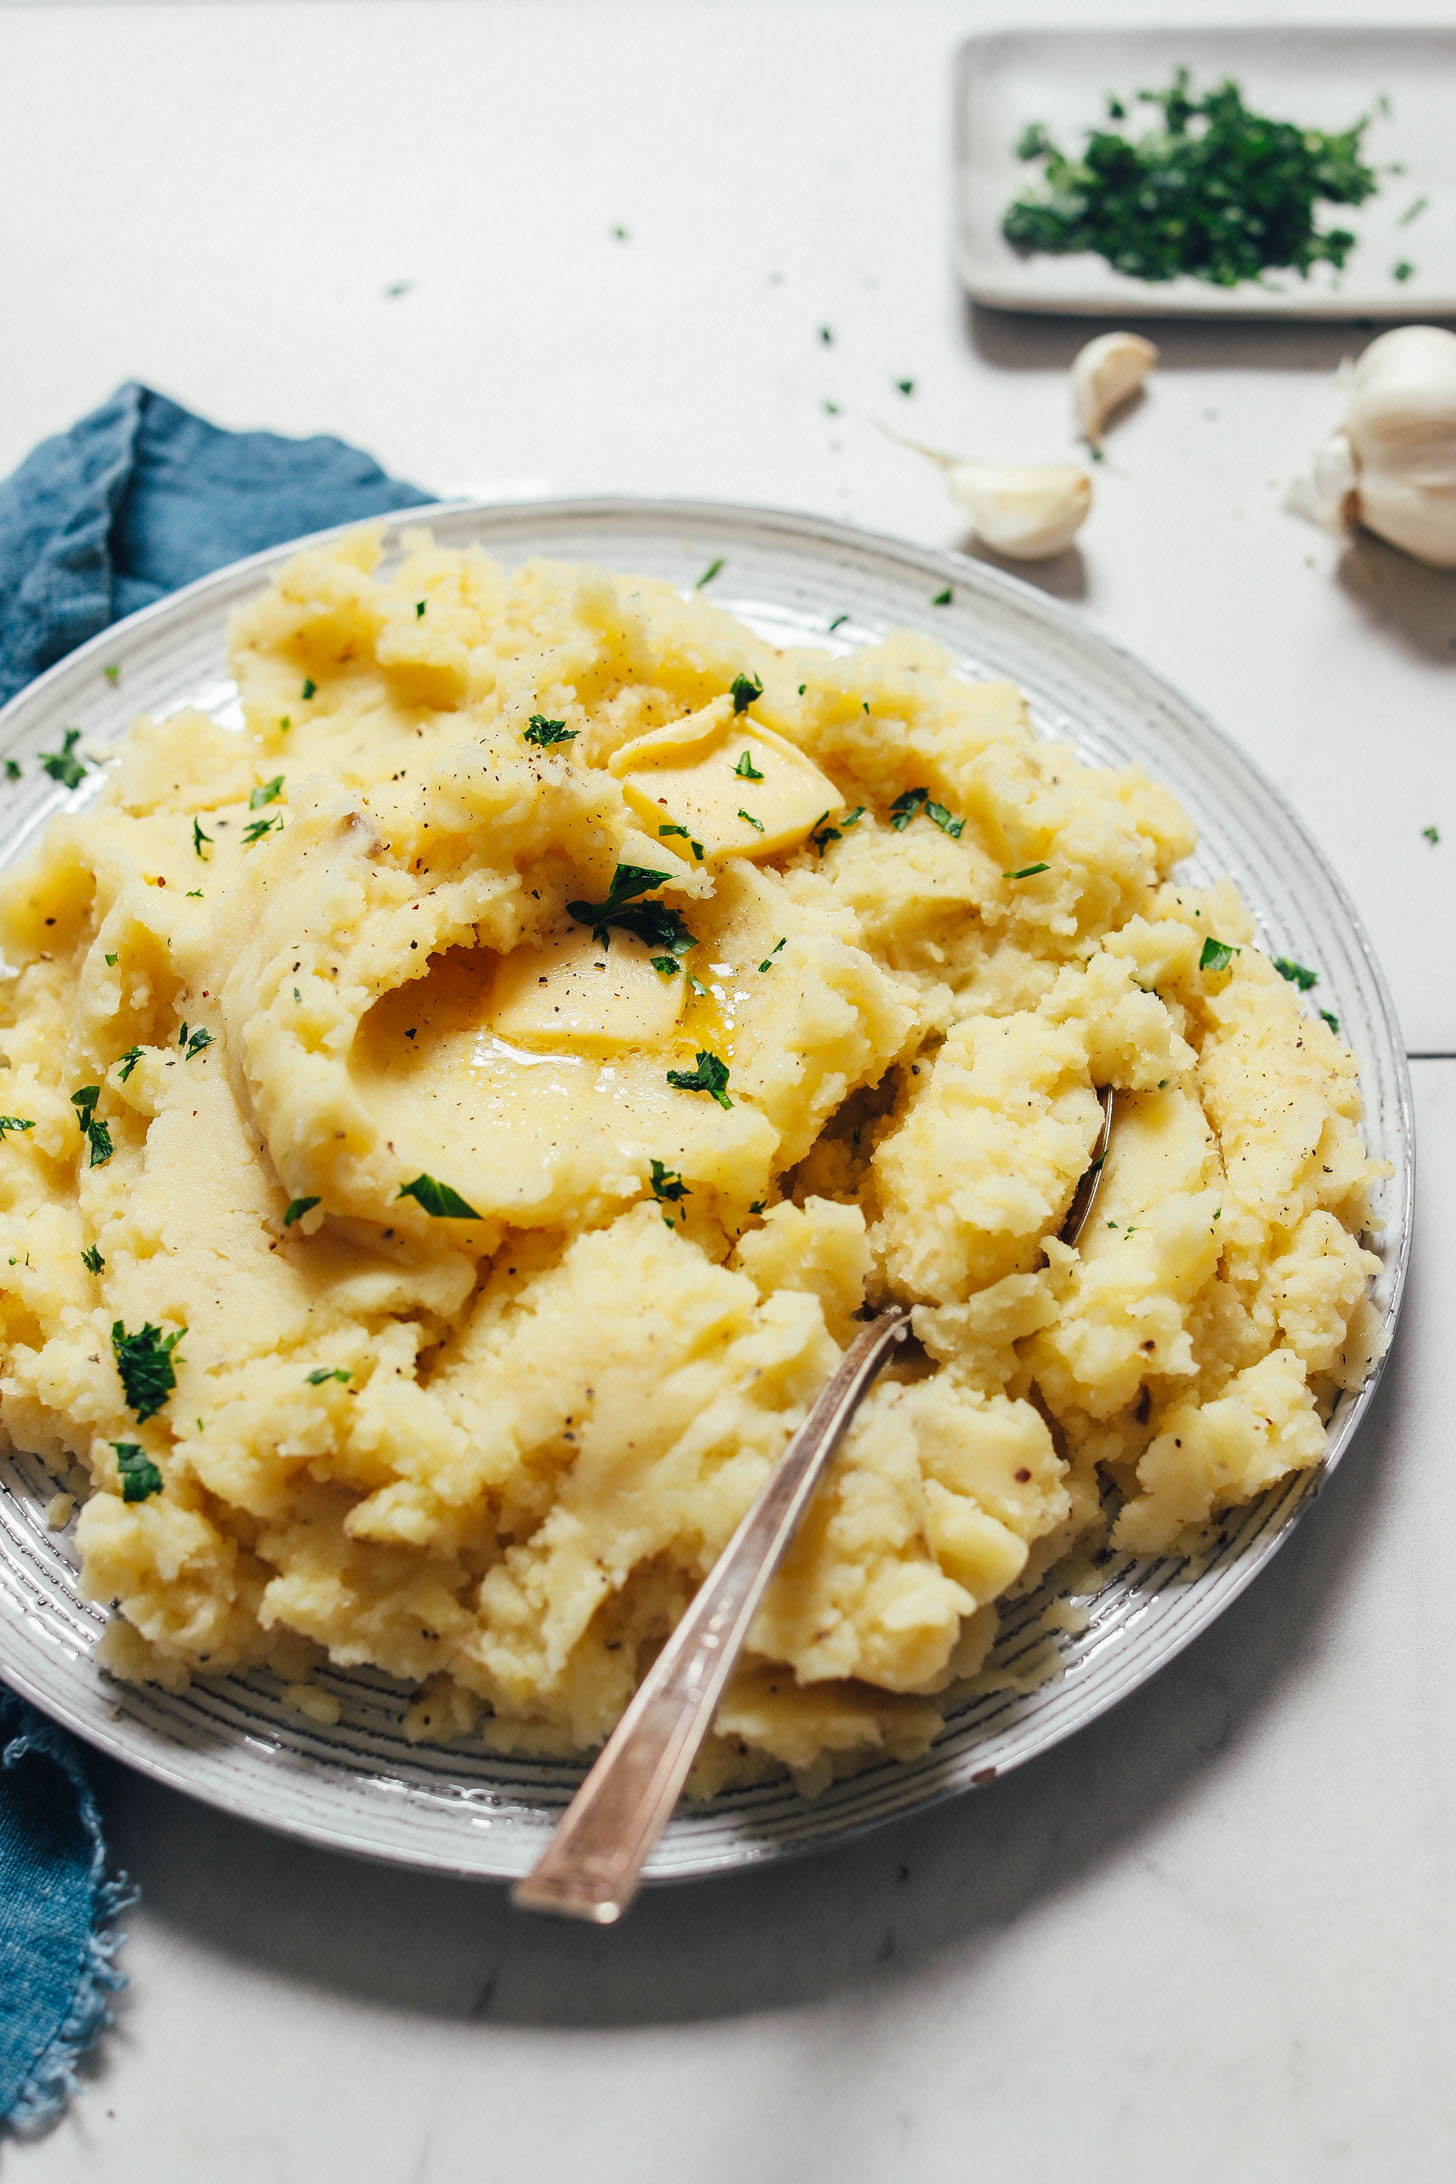 Plate of easy Vegan Mashed Potatoes topped with fresh parsley